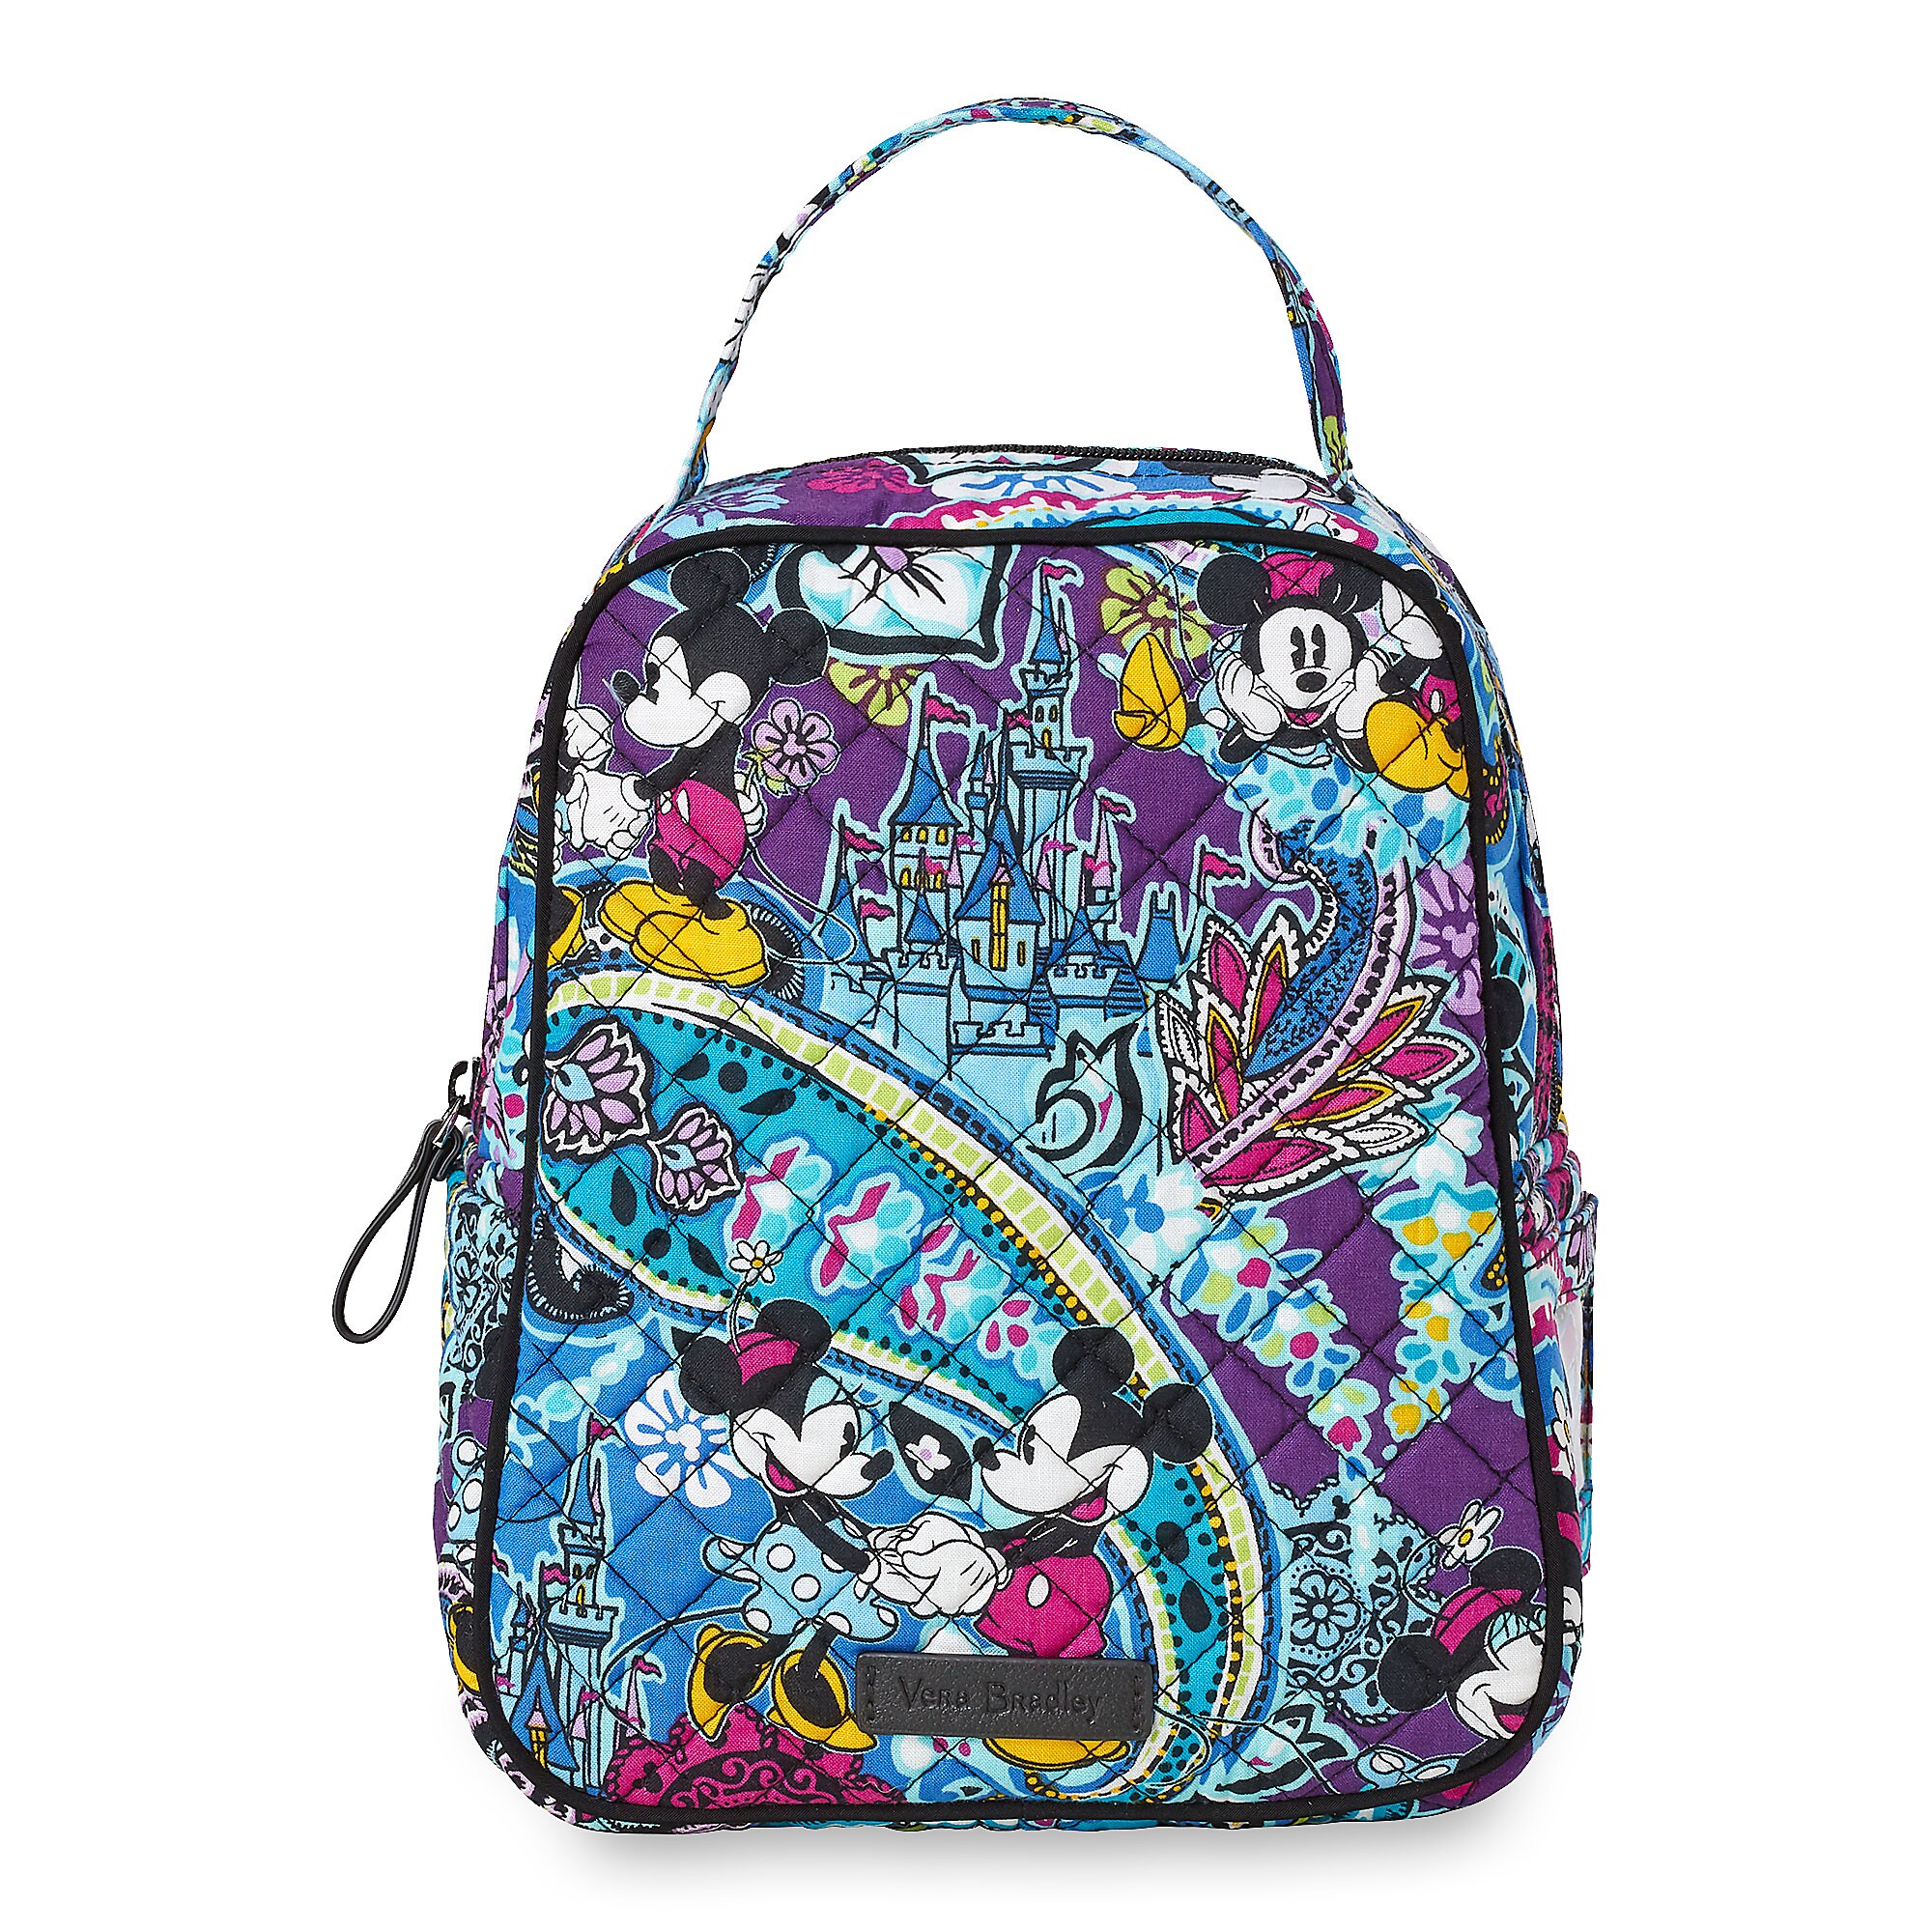 Mickey and Minnie Mouse Paisley Lunch Bunch Bag by Vera Bradley